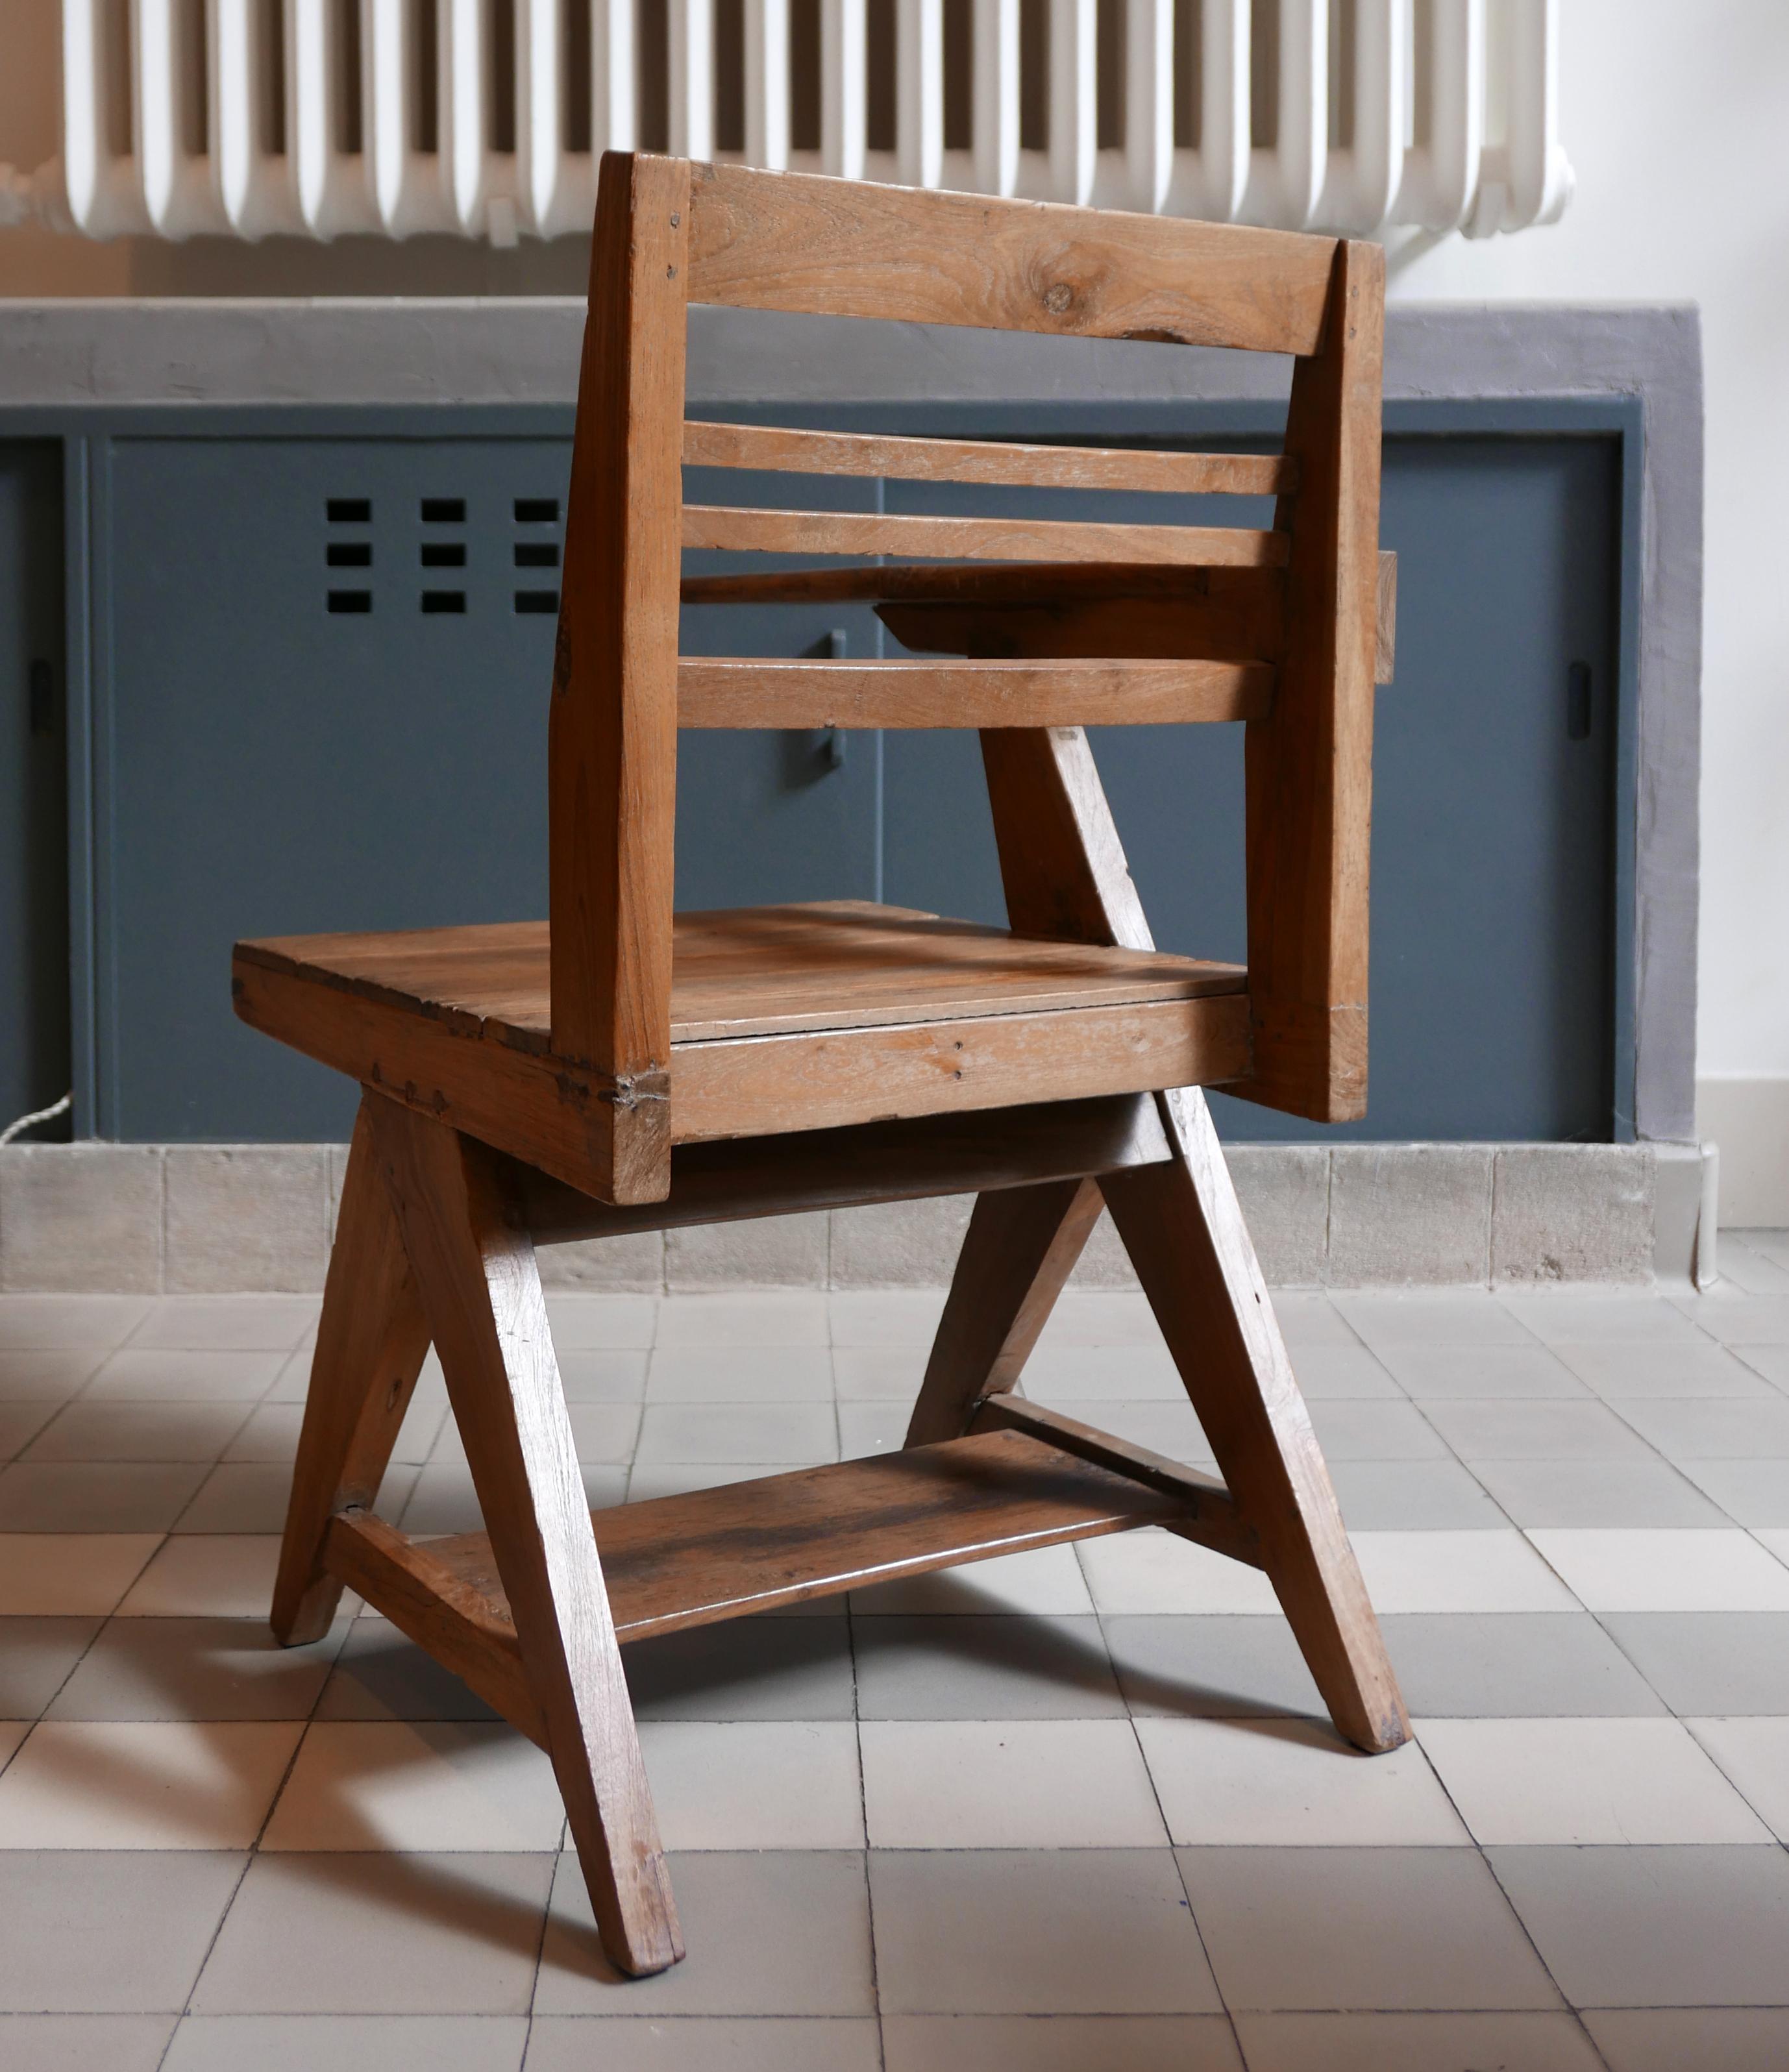 Indian Pierre Jeanneret, Classroom Chair, 1960